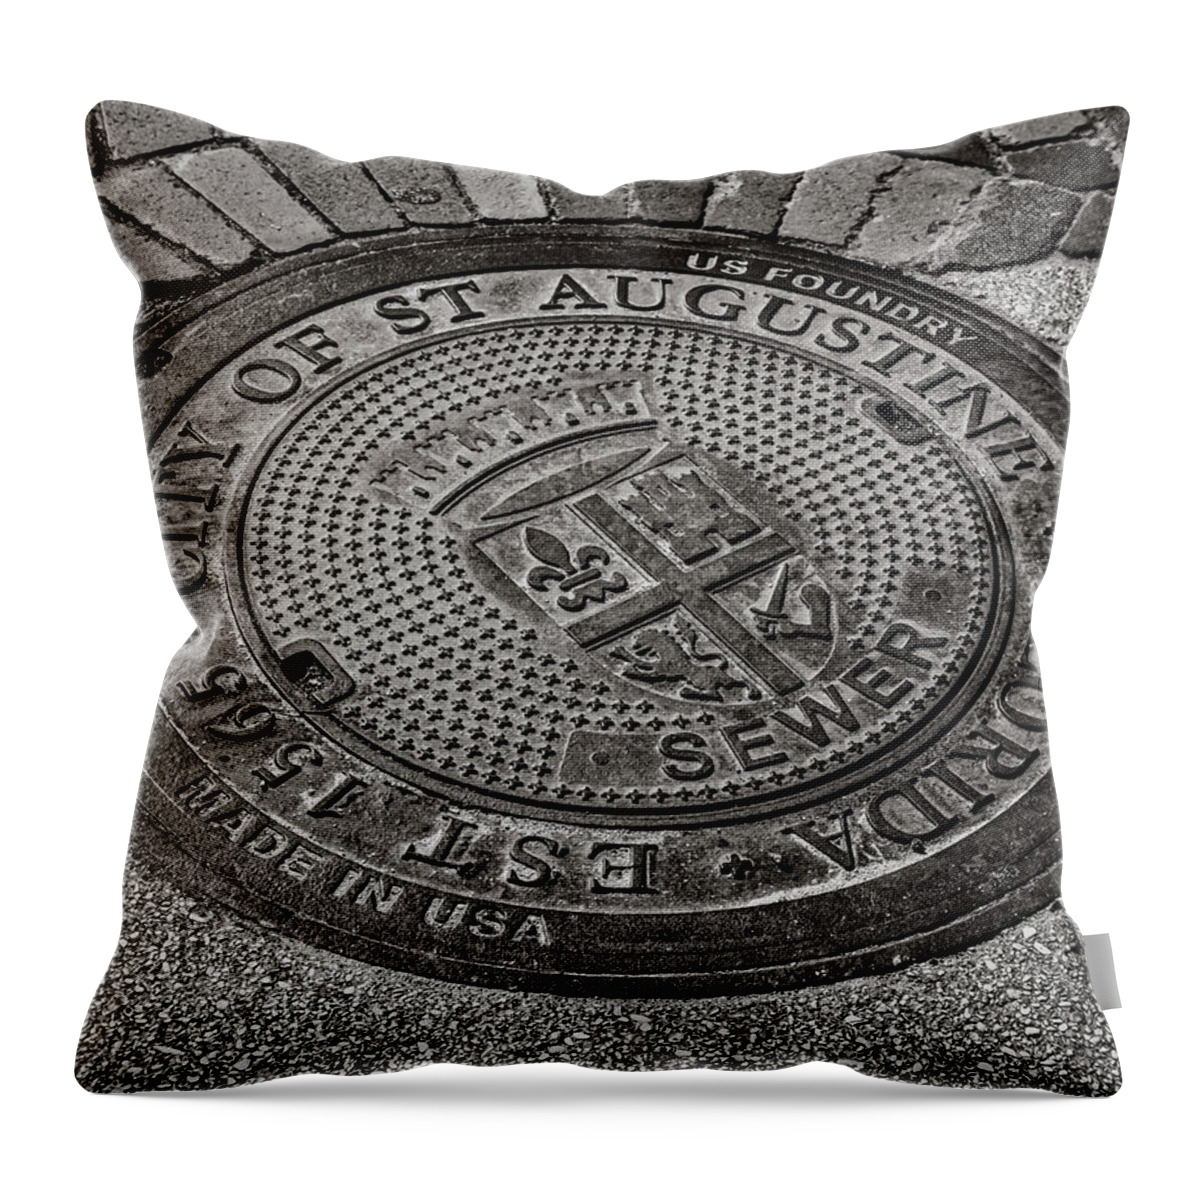 Florida Throw Pillow featuring the photograph St. Augustine manhole cover by Andy Crawford